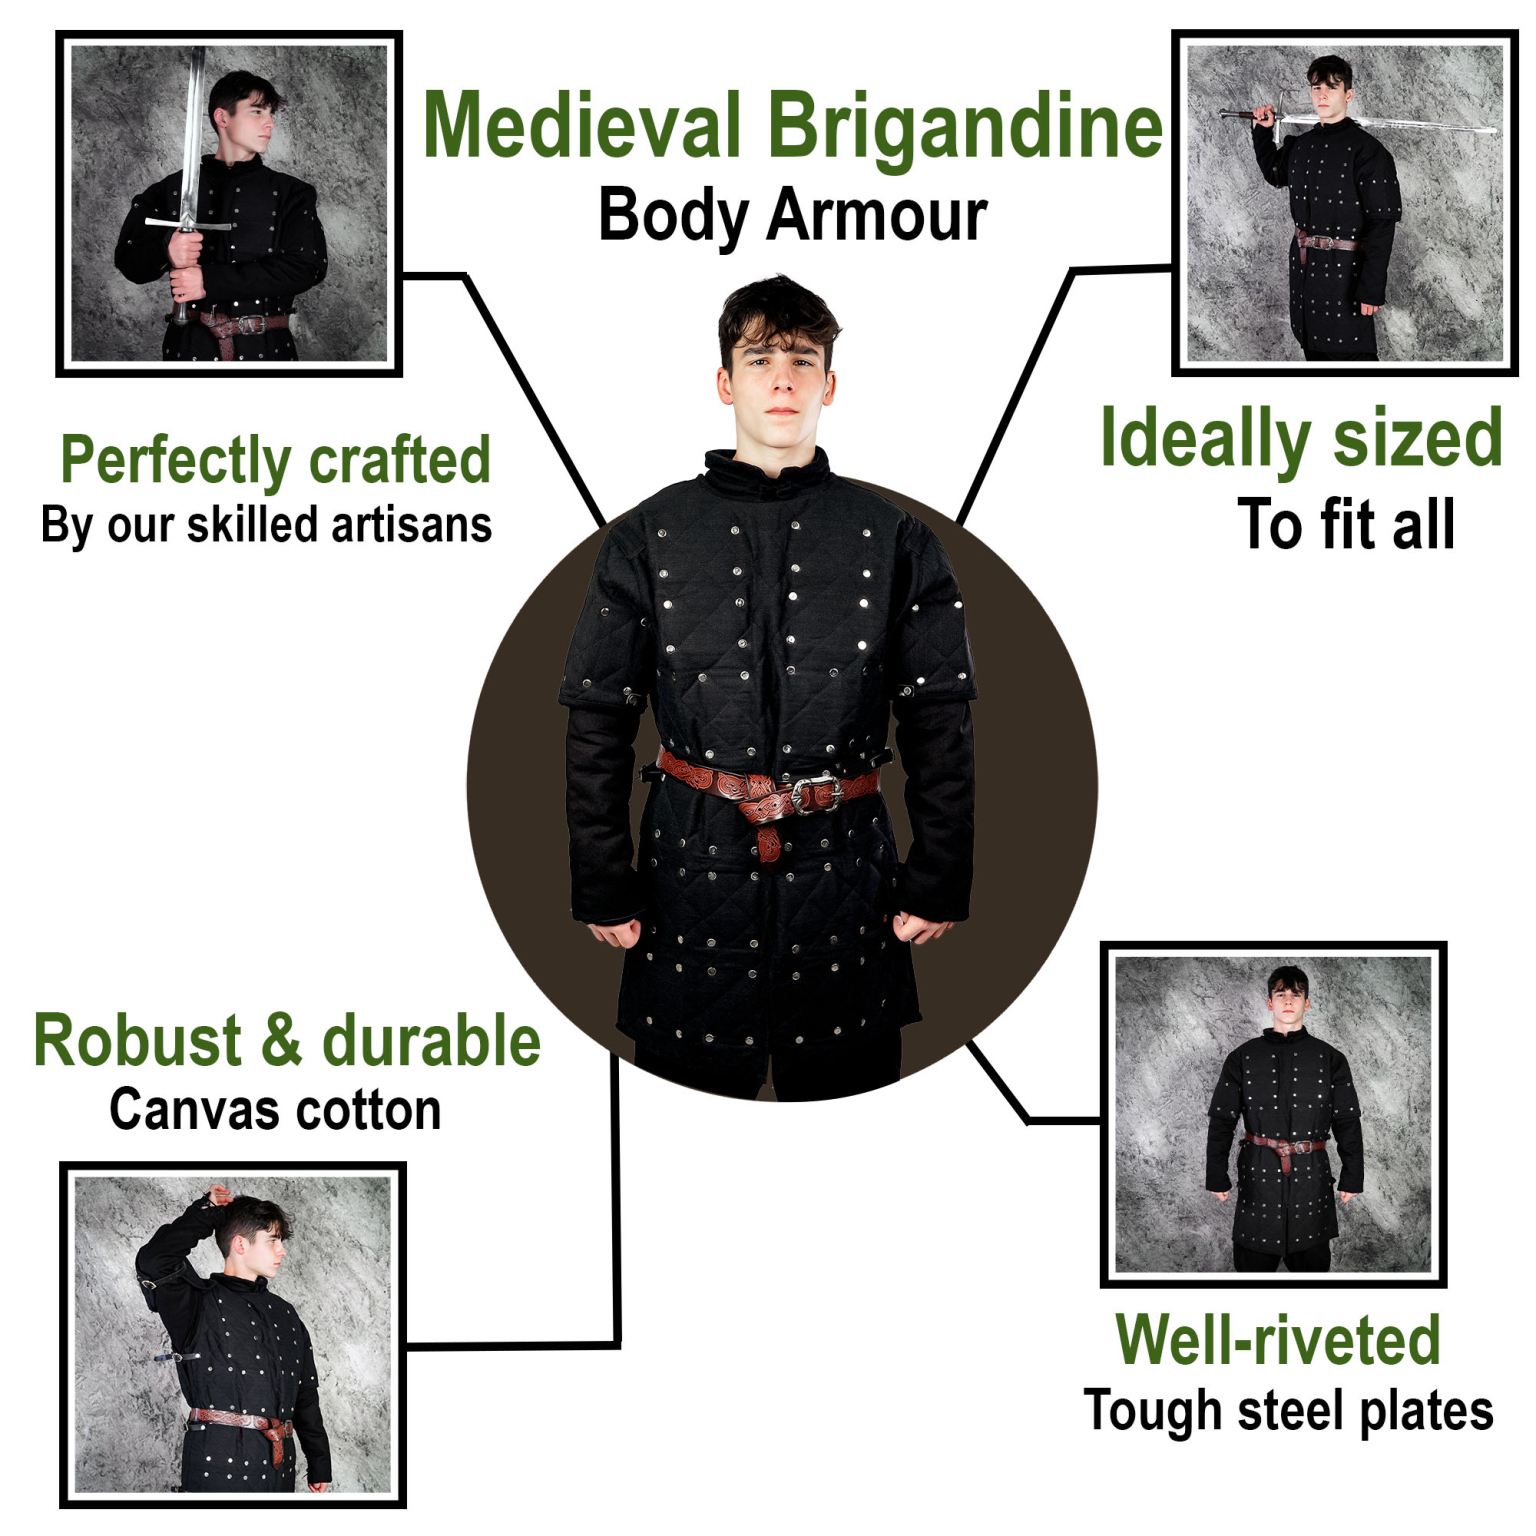 Riveted Steel Plates Body Armor - Lord of Battles Medieval Brigandine